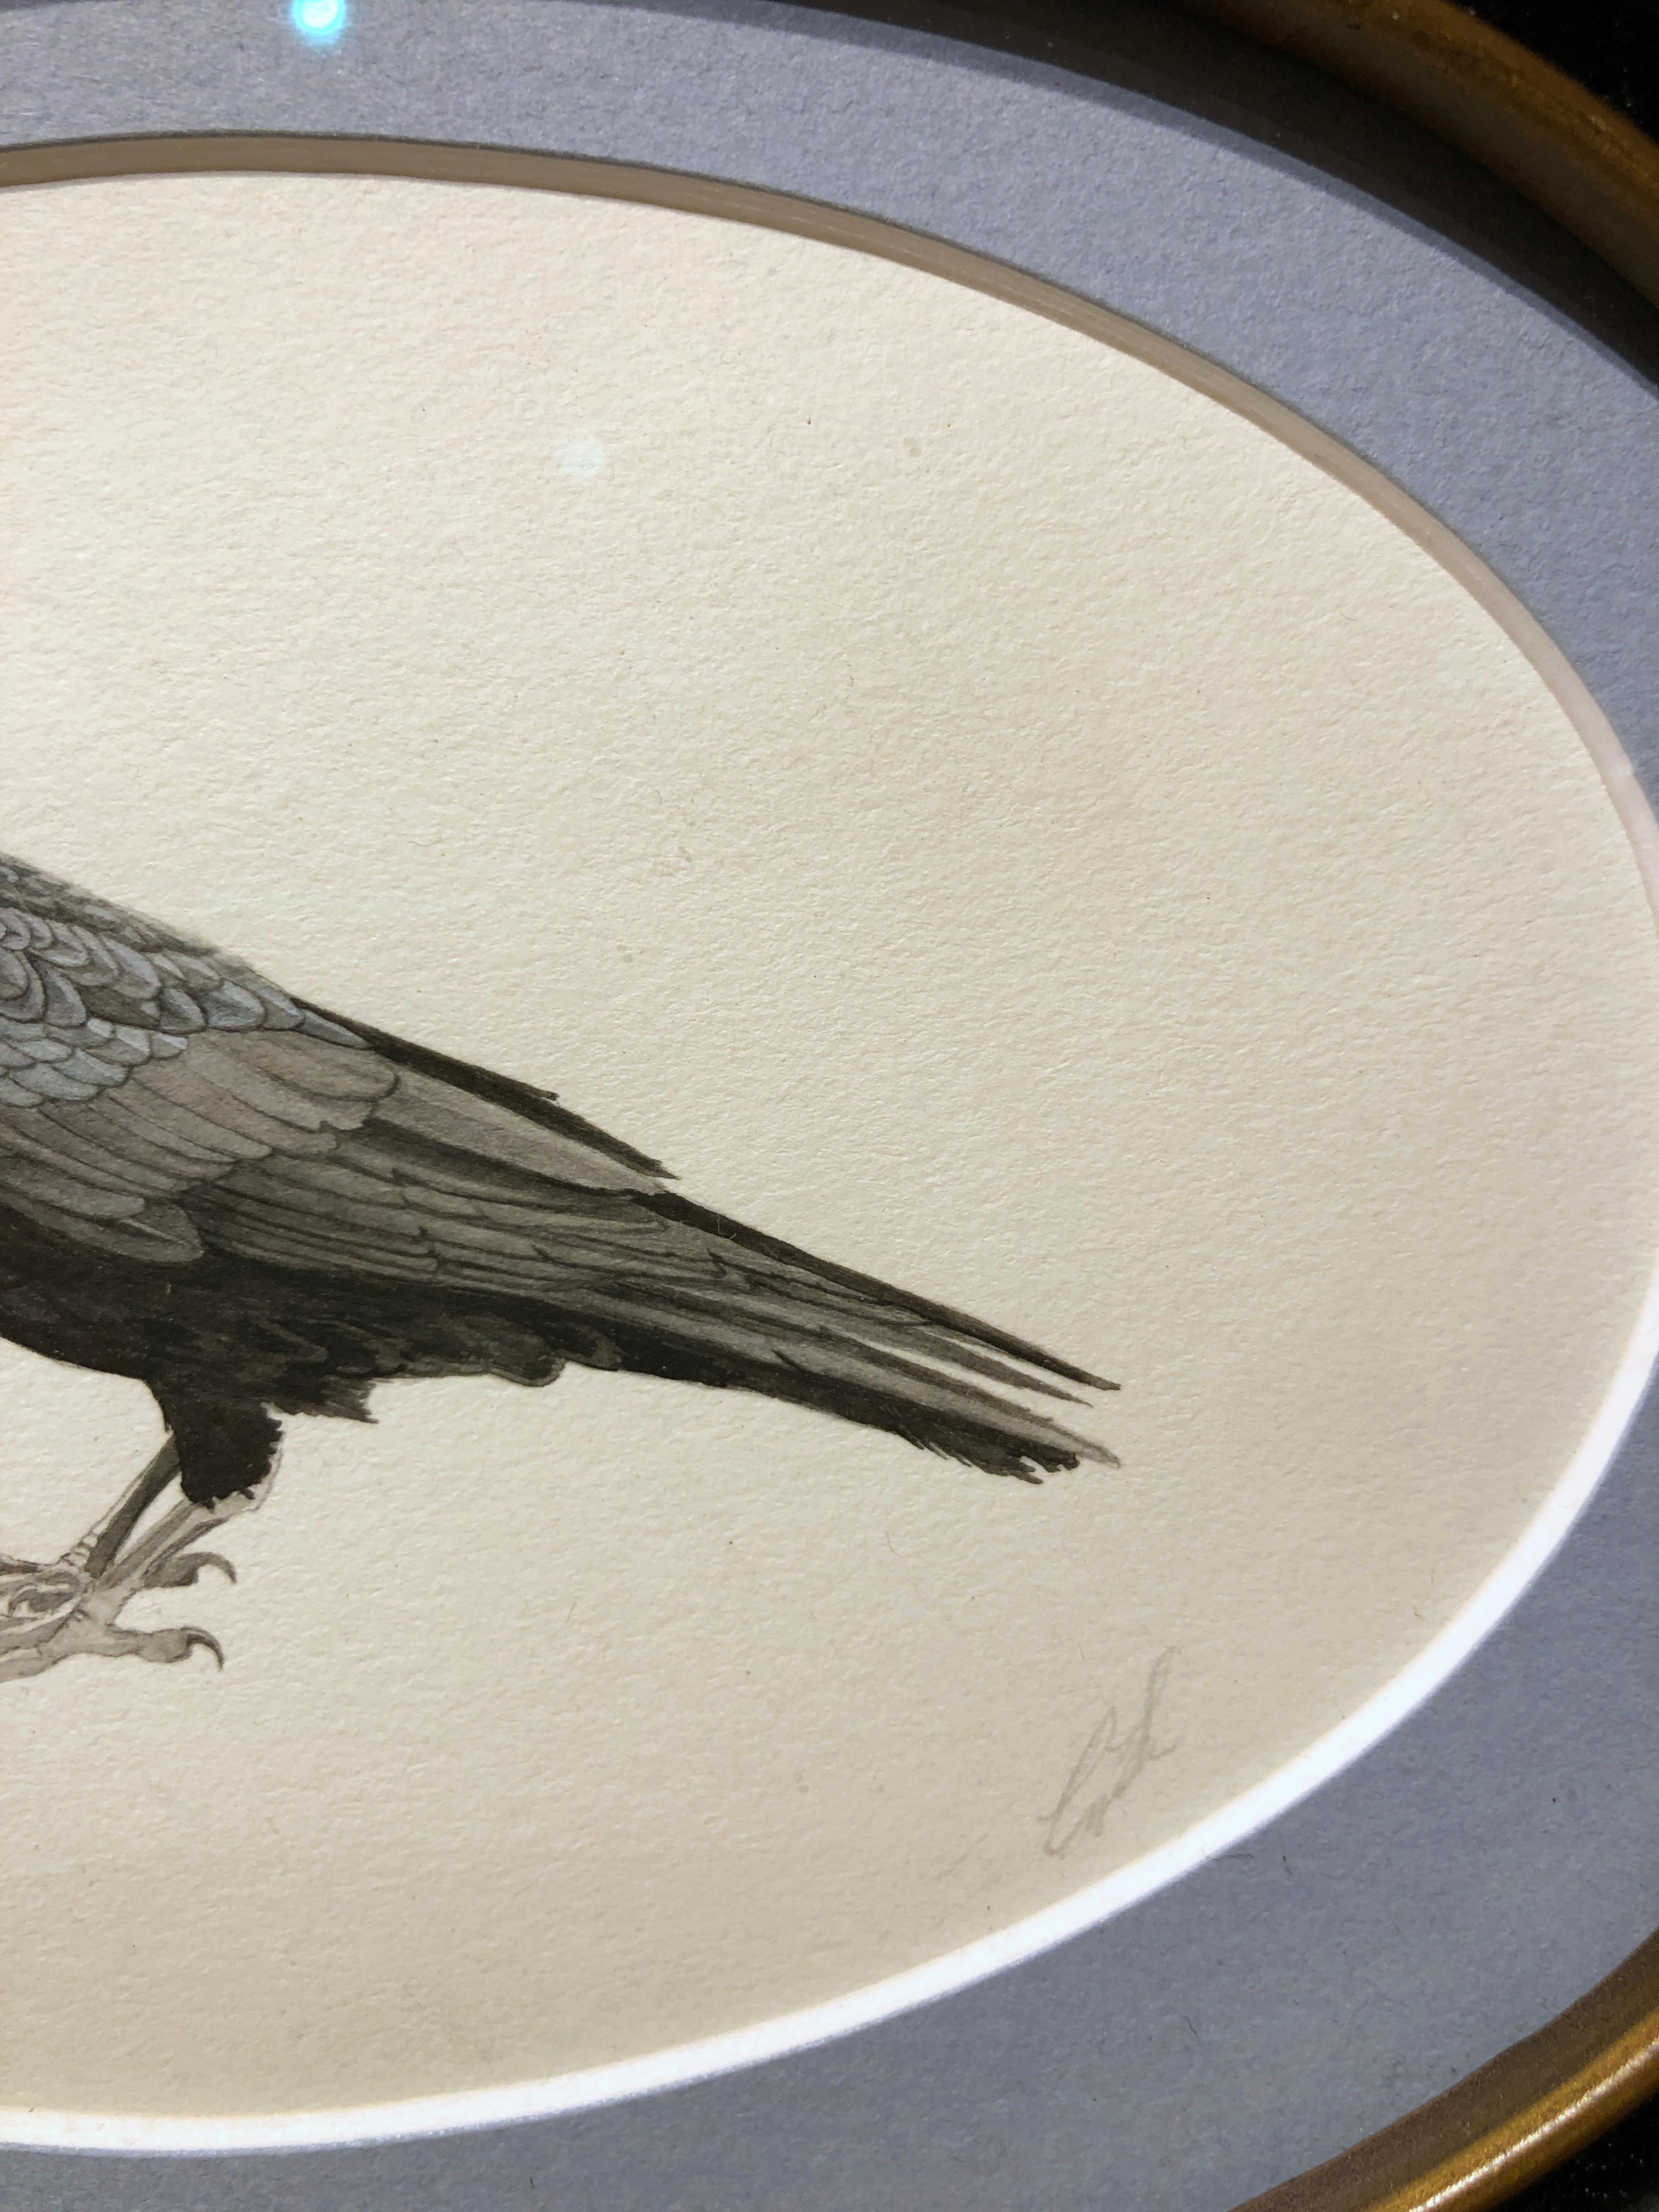 Zombie Raven II - Highly Detailed Watercolor Painting in Oval Frame - White Animal Painting by Cynthia Large